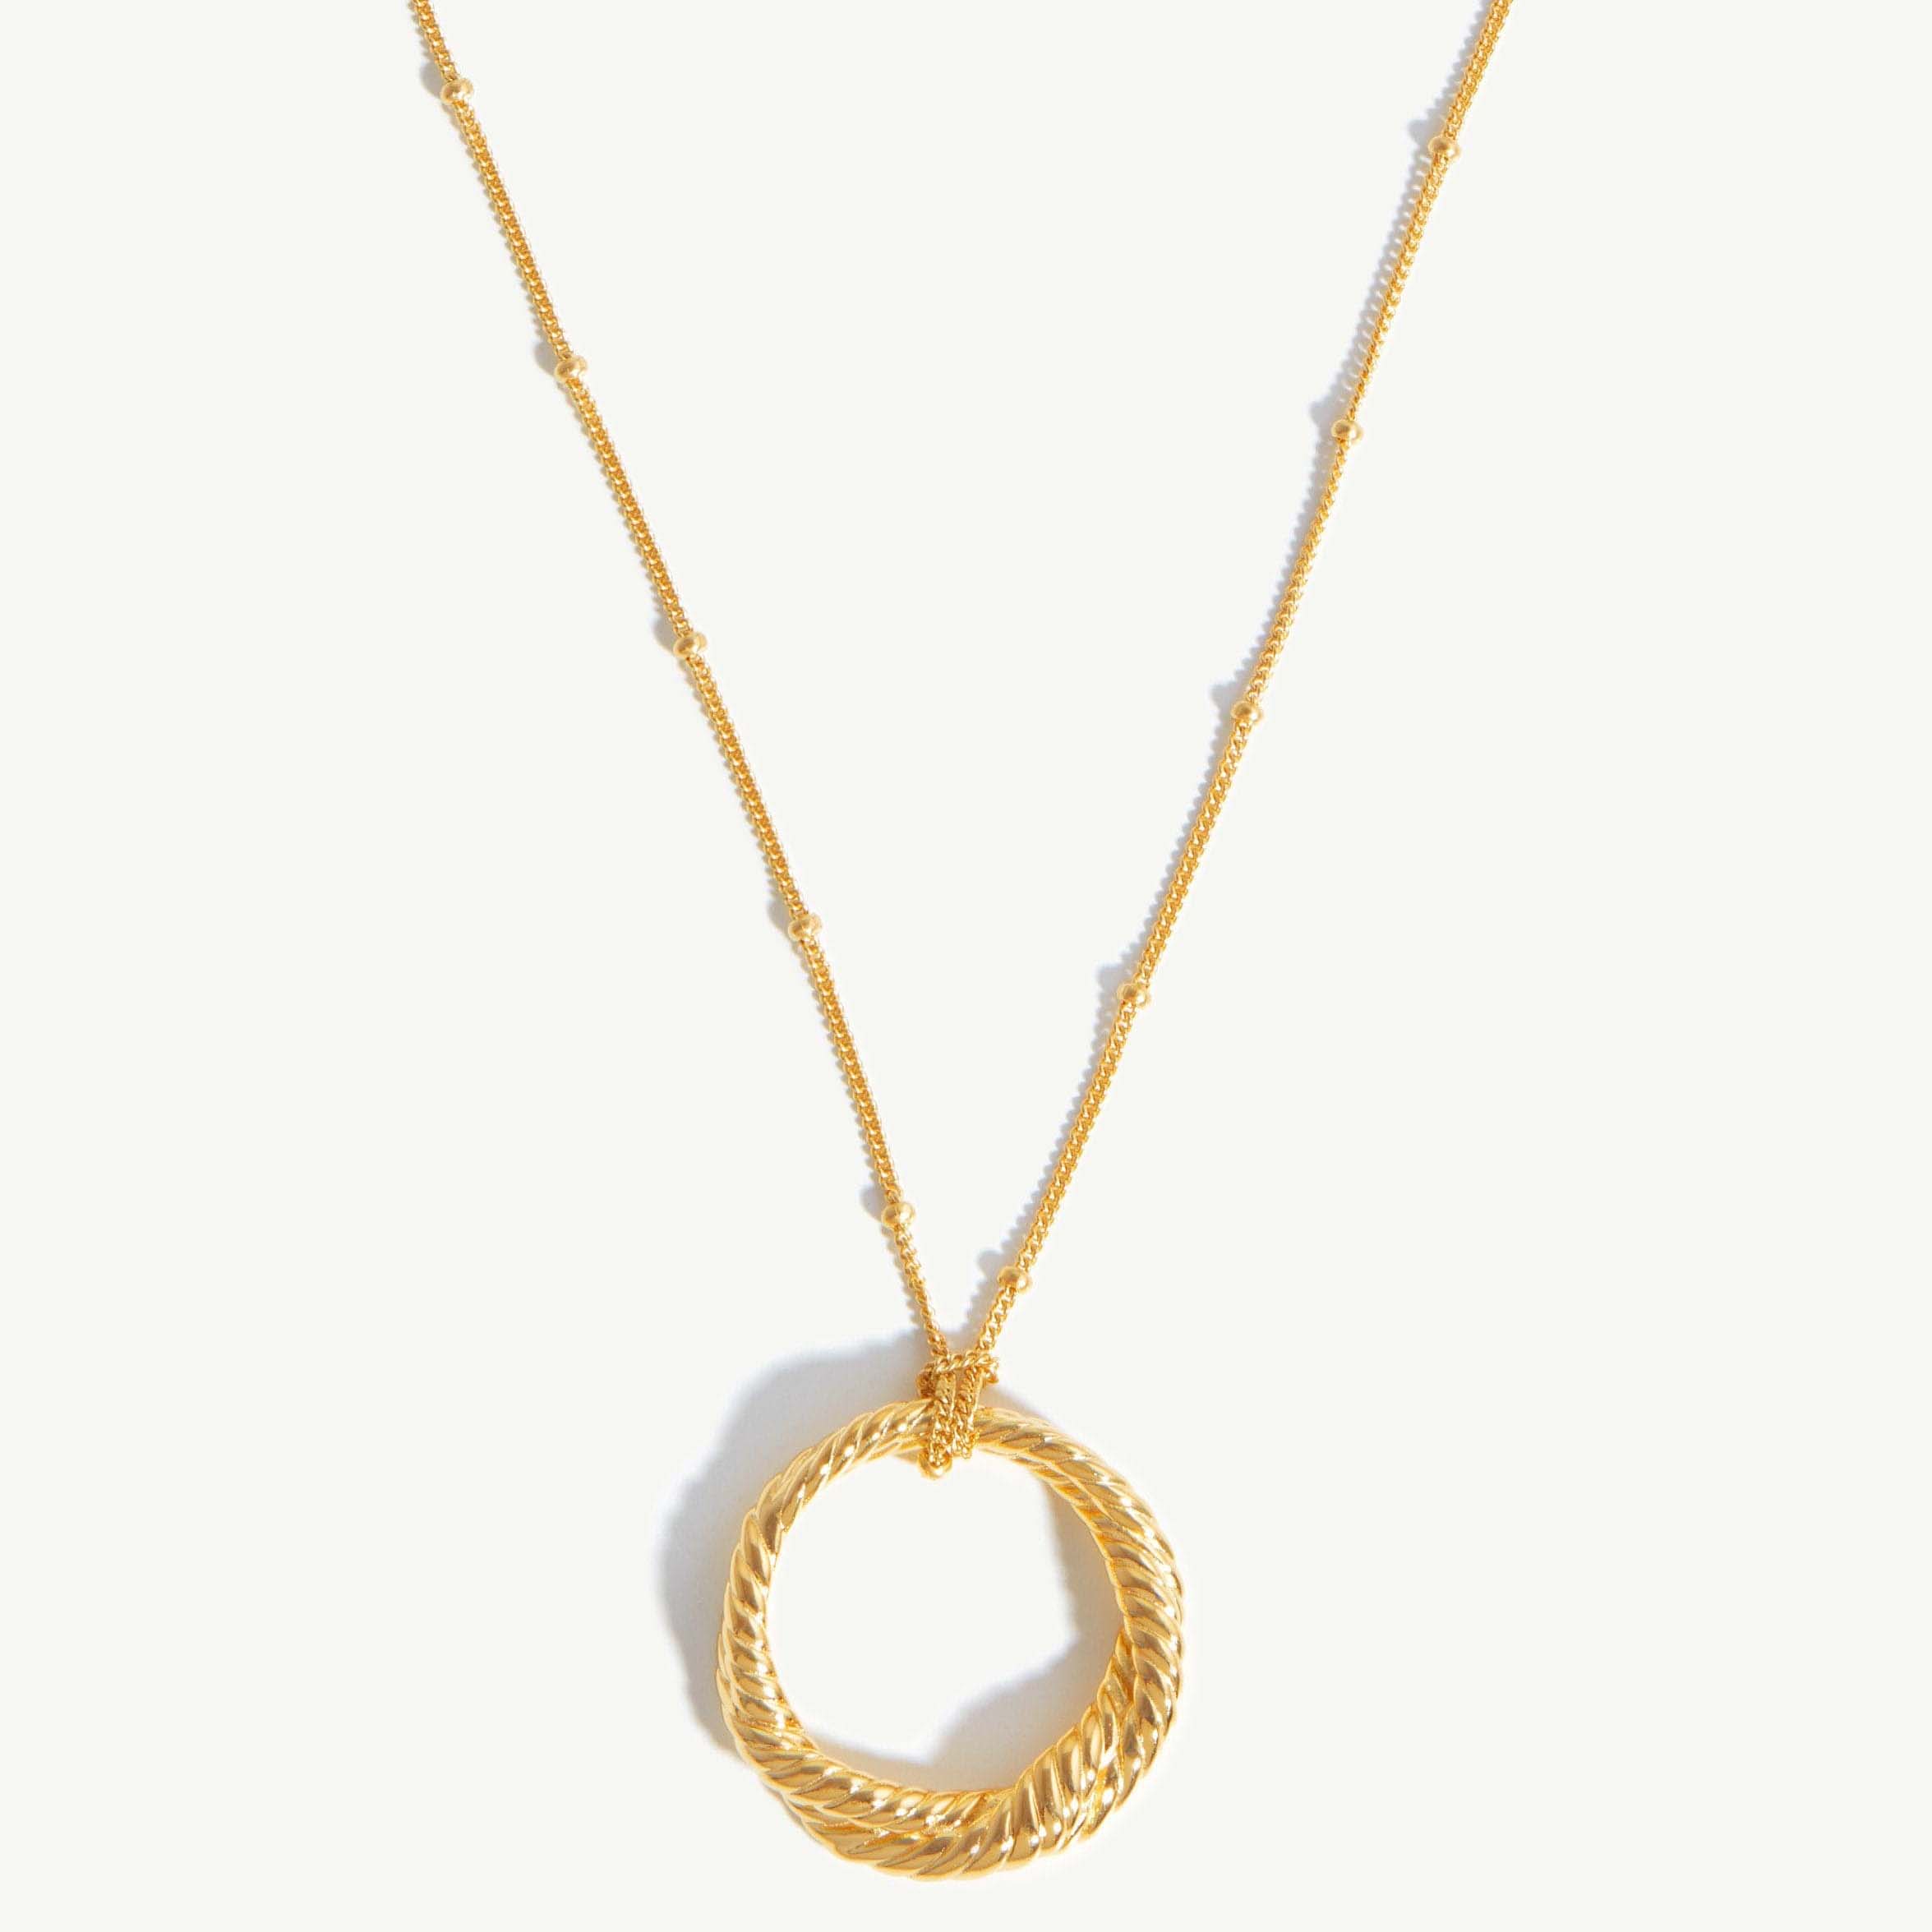 Custom wholesale double rope round pendant necklace in 18k gold plated vermeil sterling silver